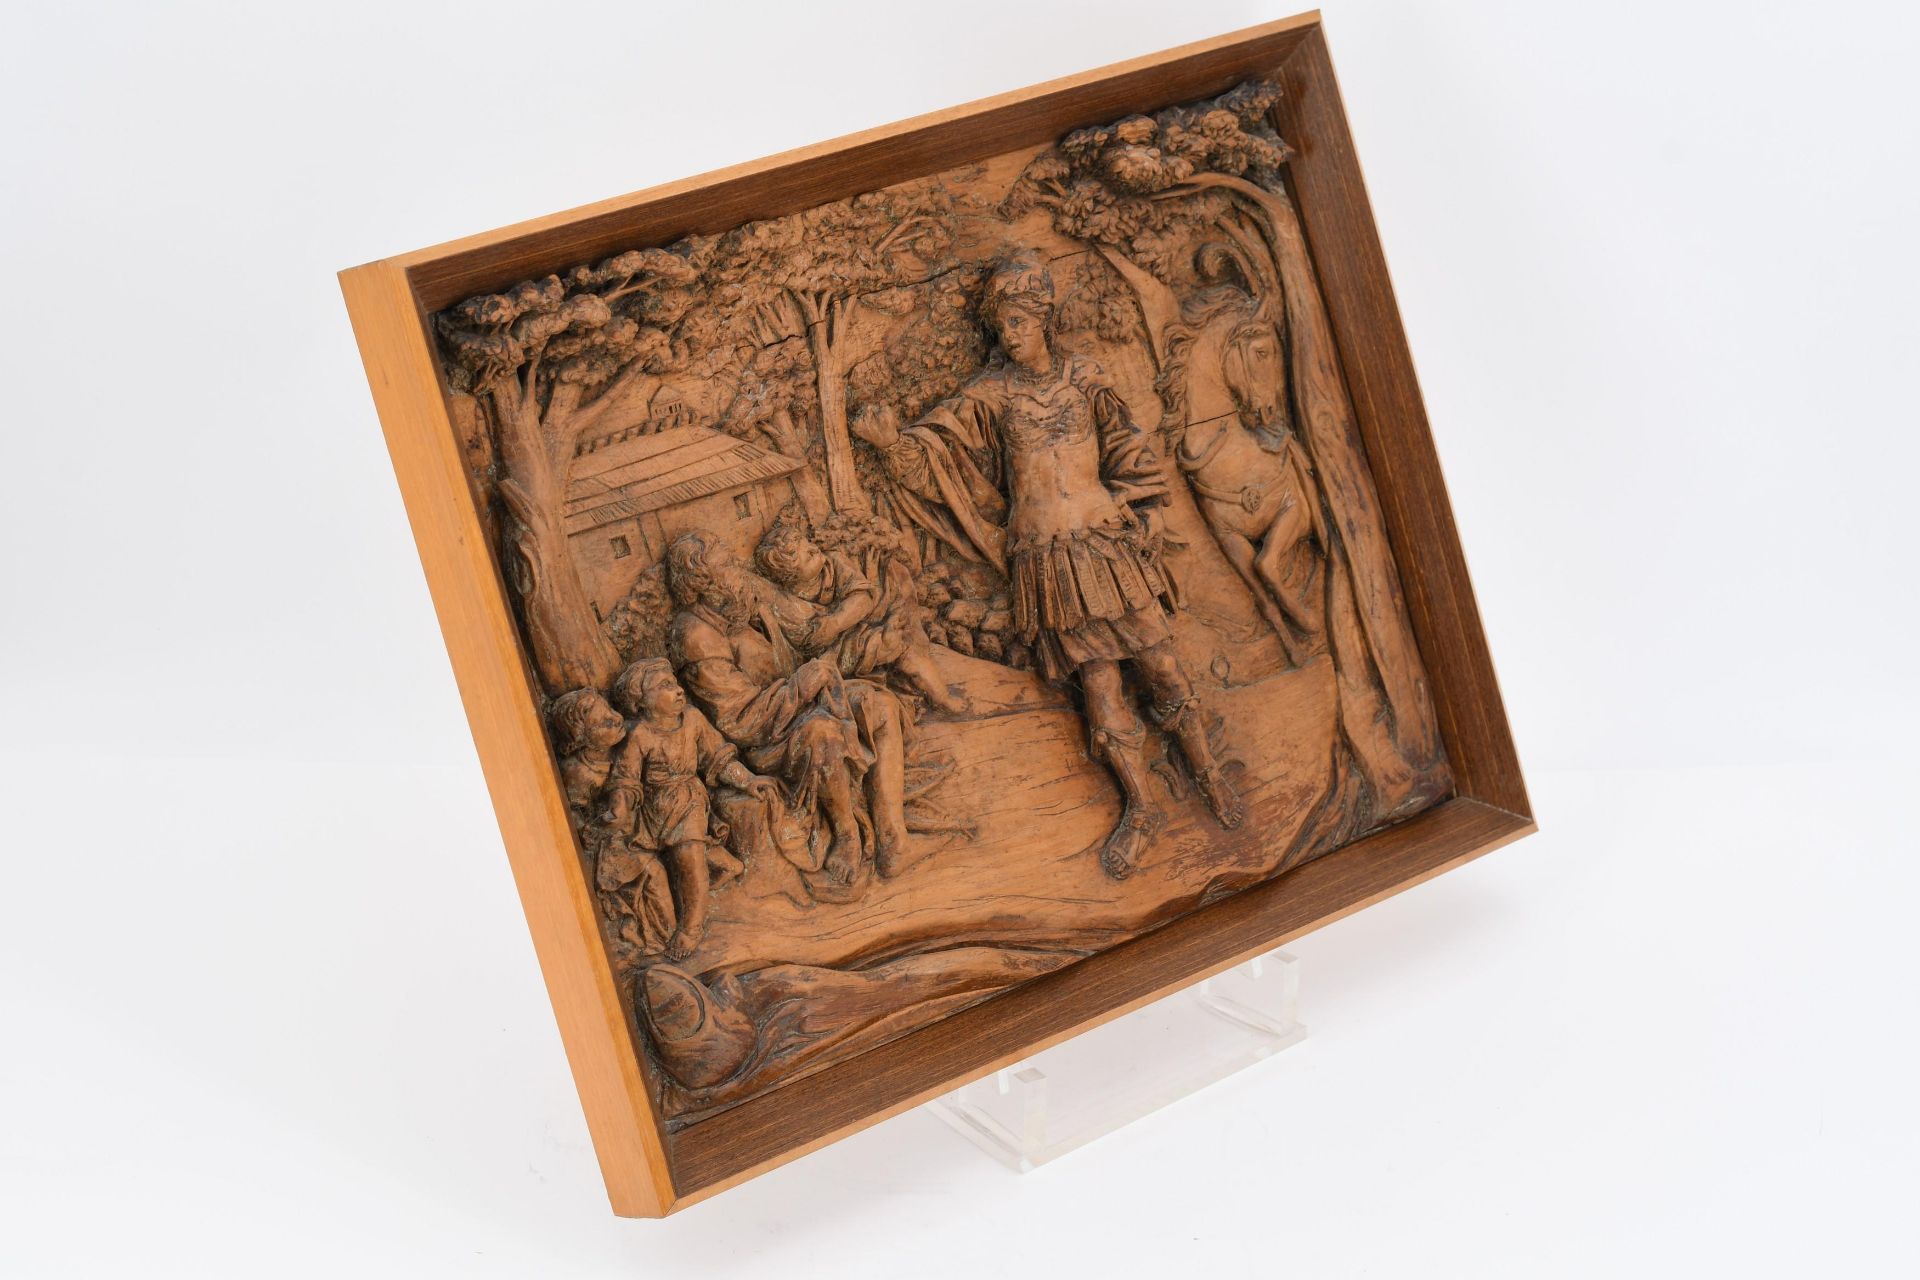 Pair of wooden reliefs with mythological scenes - Image 5 of 7